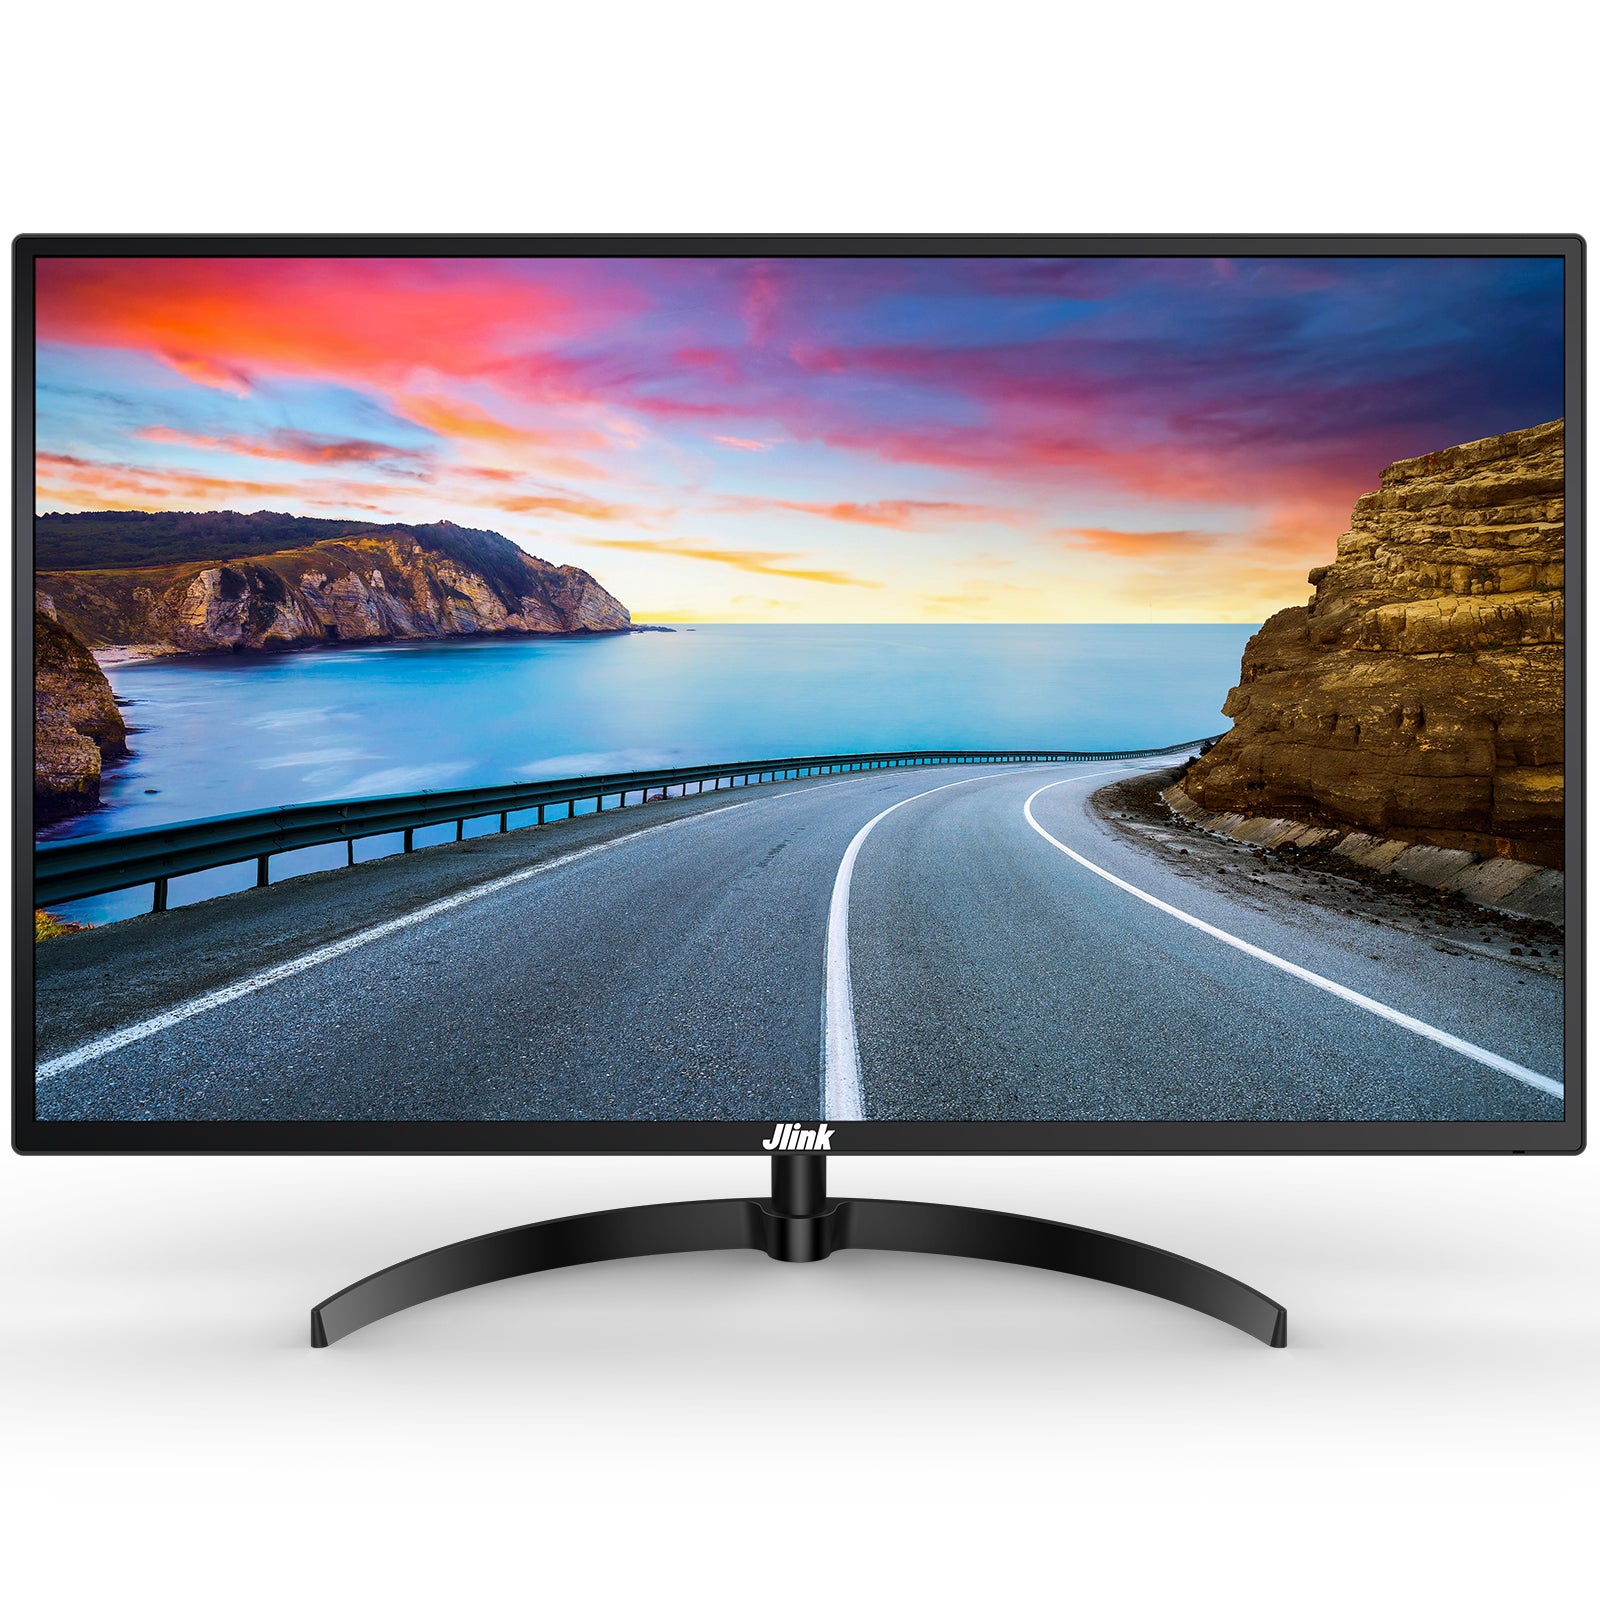 Jlink 32 Inch FHD 1920x1080P 60Hz LCD Computer Monitor